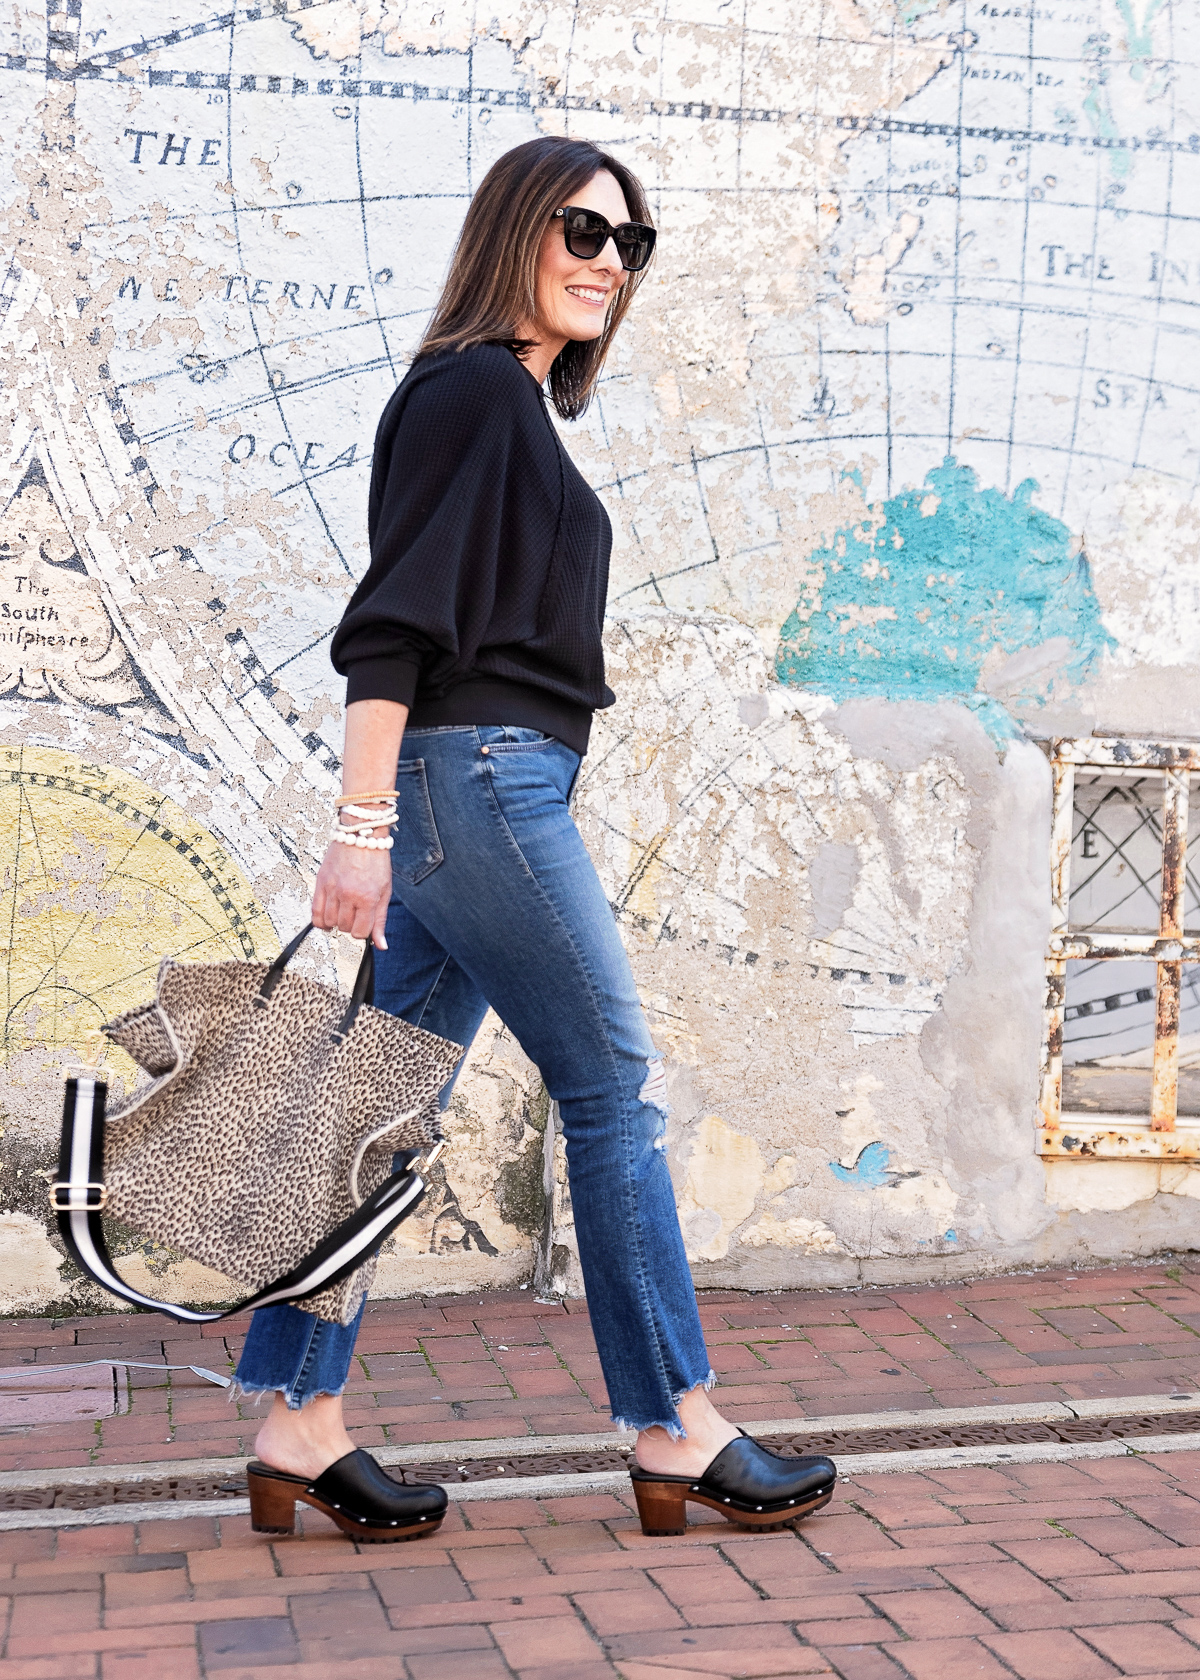 5 Shoes To Wear With Flare Jeans